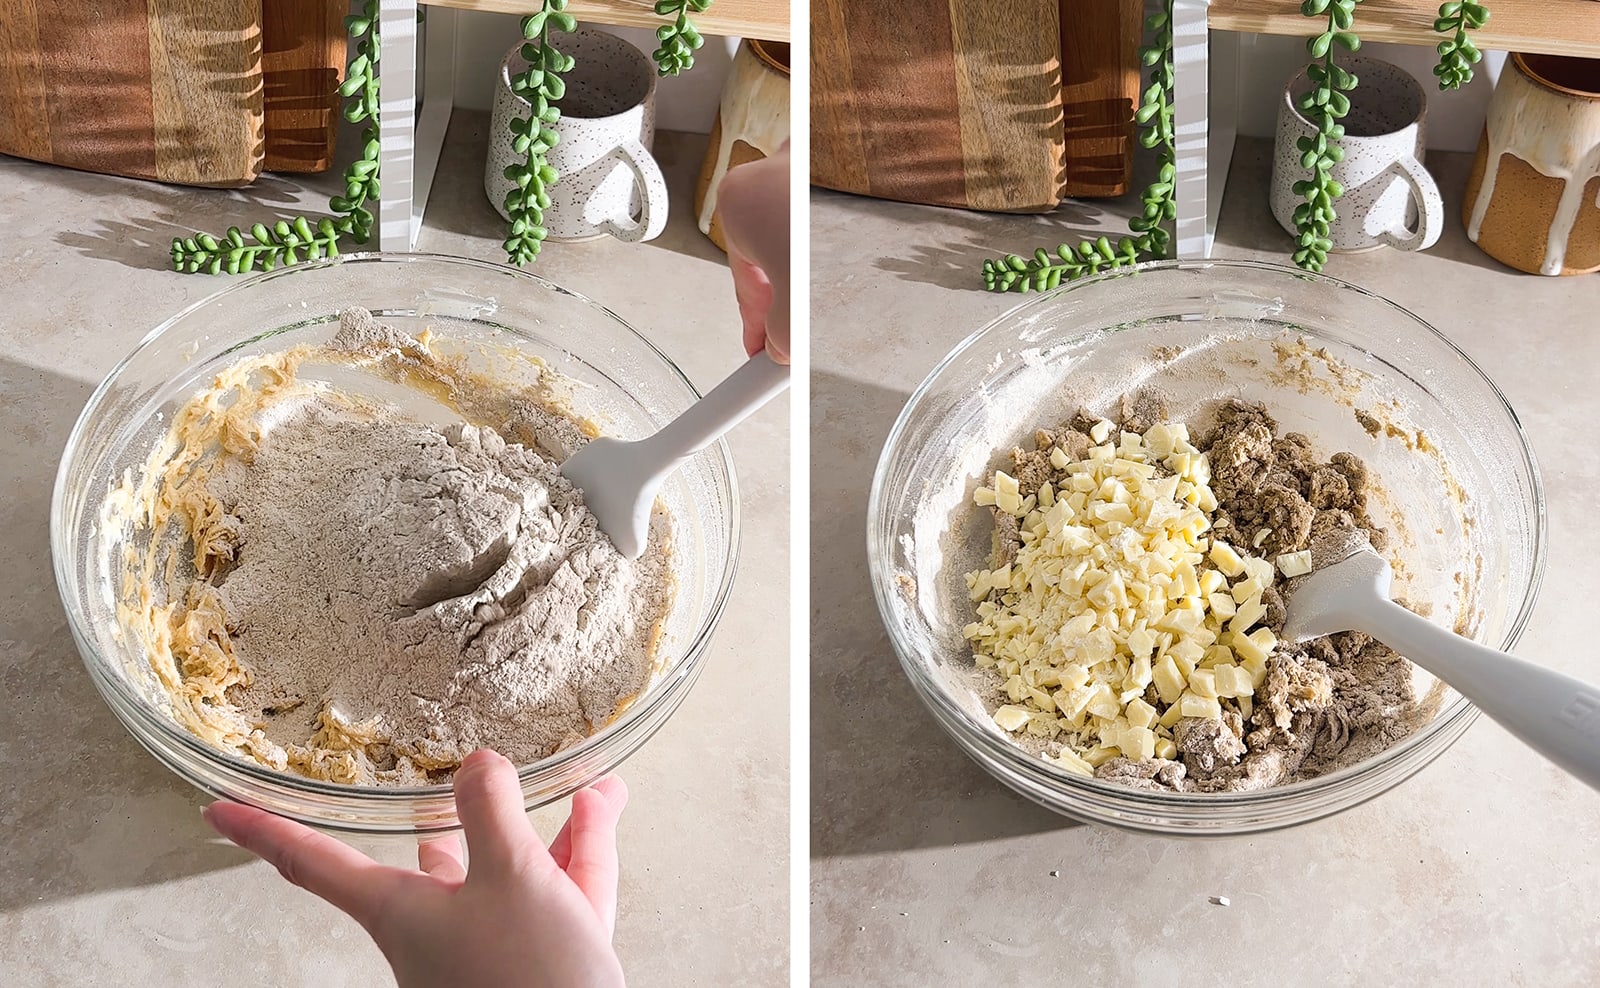 Left to right: flour in a bowl of wet dough, white chocolate chunks in a bowl of cookie dough.